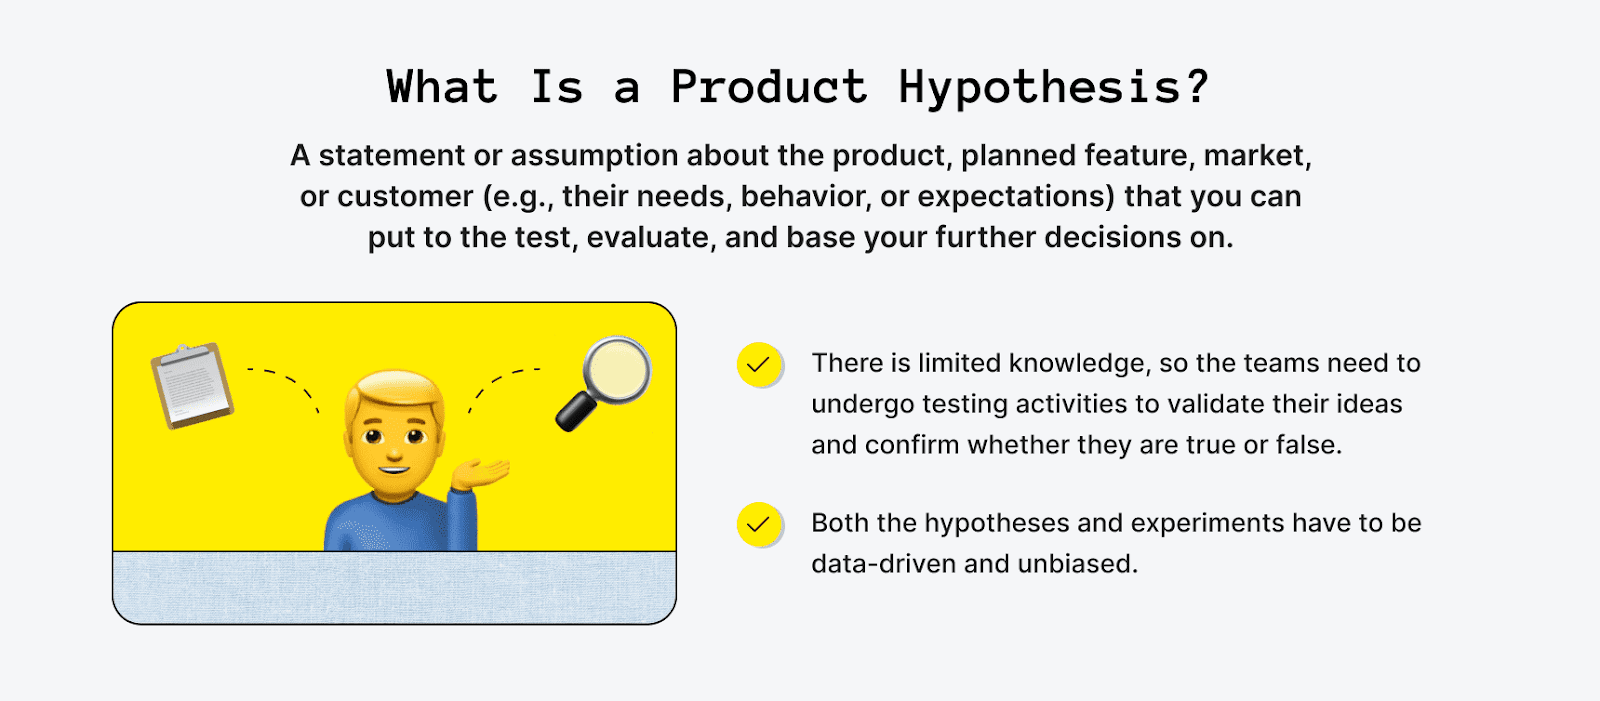 What is a product hypothesis